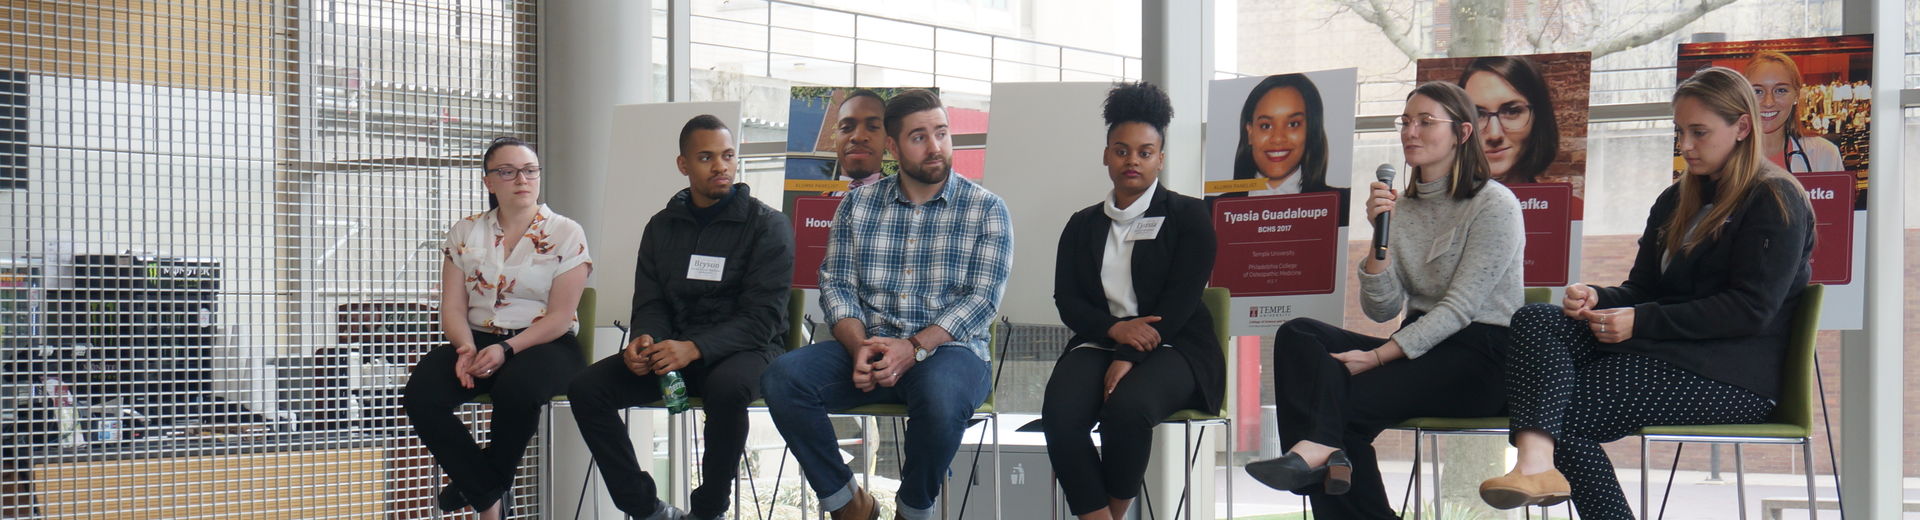 Students participating in panel discussion